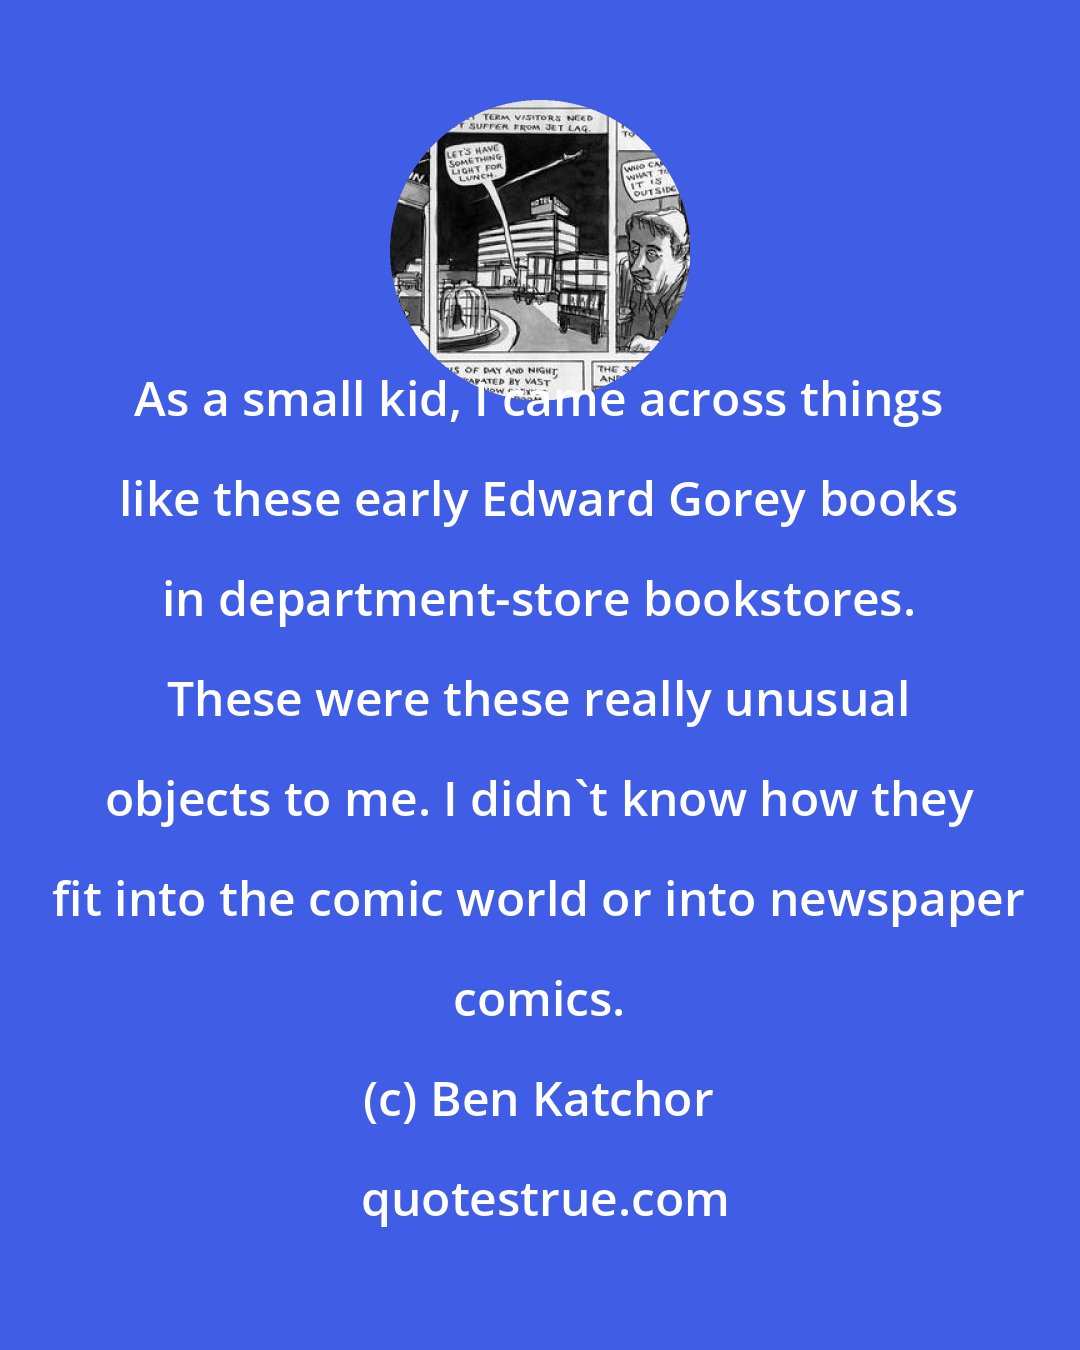 Ben Katchor: As a small kid, I came across things like these early Edward Gorey books in department-store bookstores. These were these really unusual objects to me. I didn't know how they fit into the comic world or into newspaper comics.